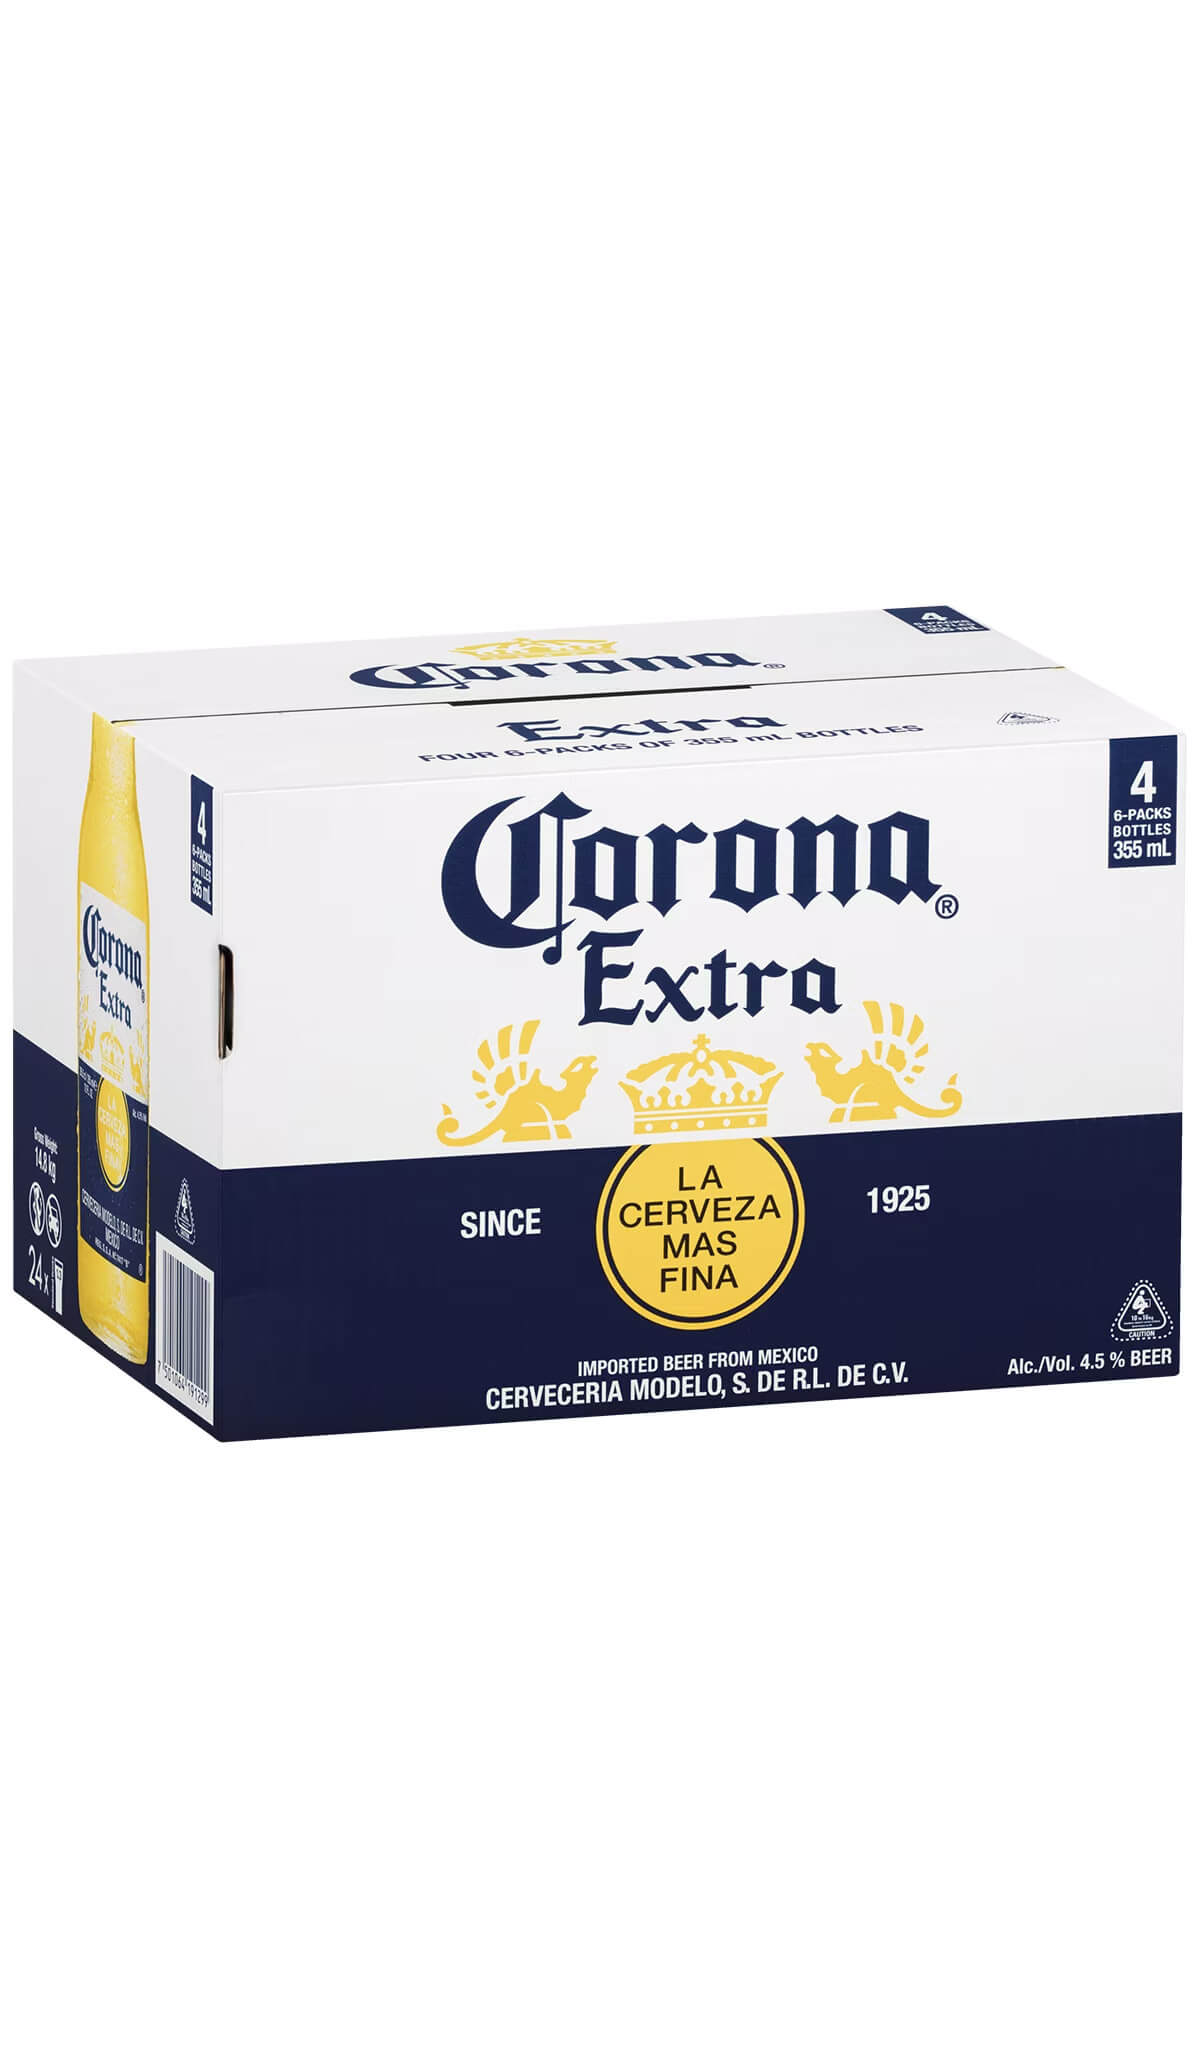 Find out more, explore the range and purchase Corona Extra 24x355mL Bottle Slab online at Wine Sellers Direct - Australia's independent liquor specialists.